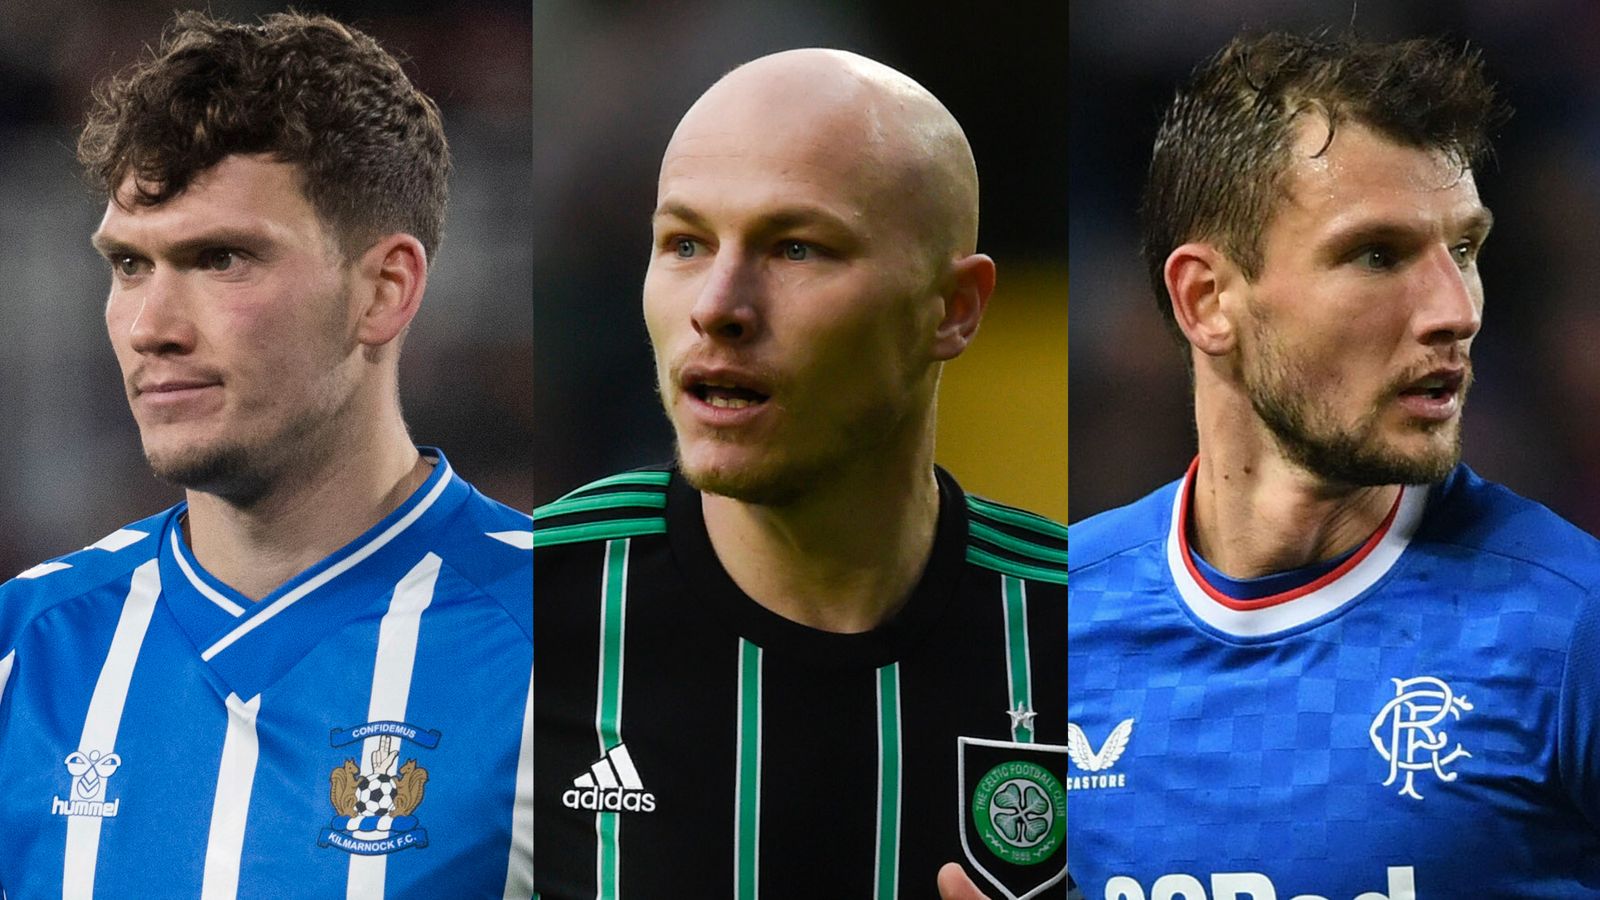 Scottish Premiership: Celtic, Rangers, Dundee United and St Johnstone feature in Team of the Week